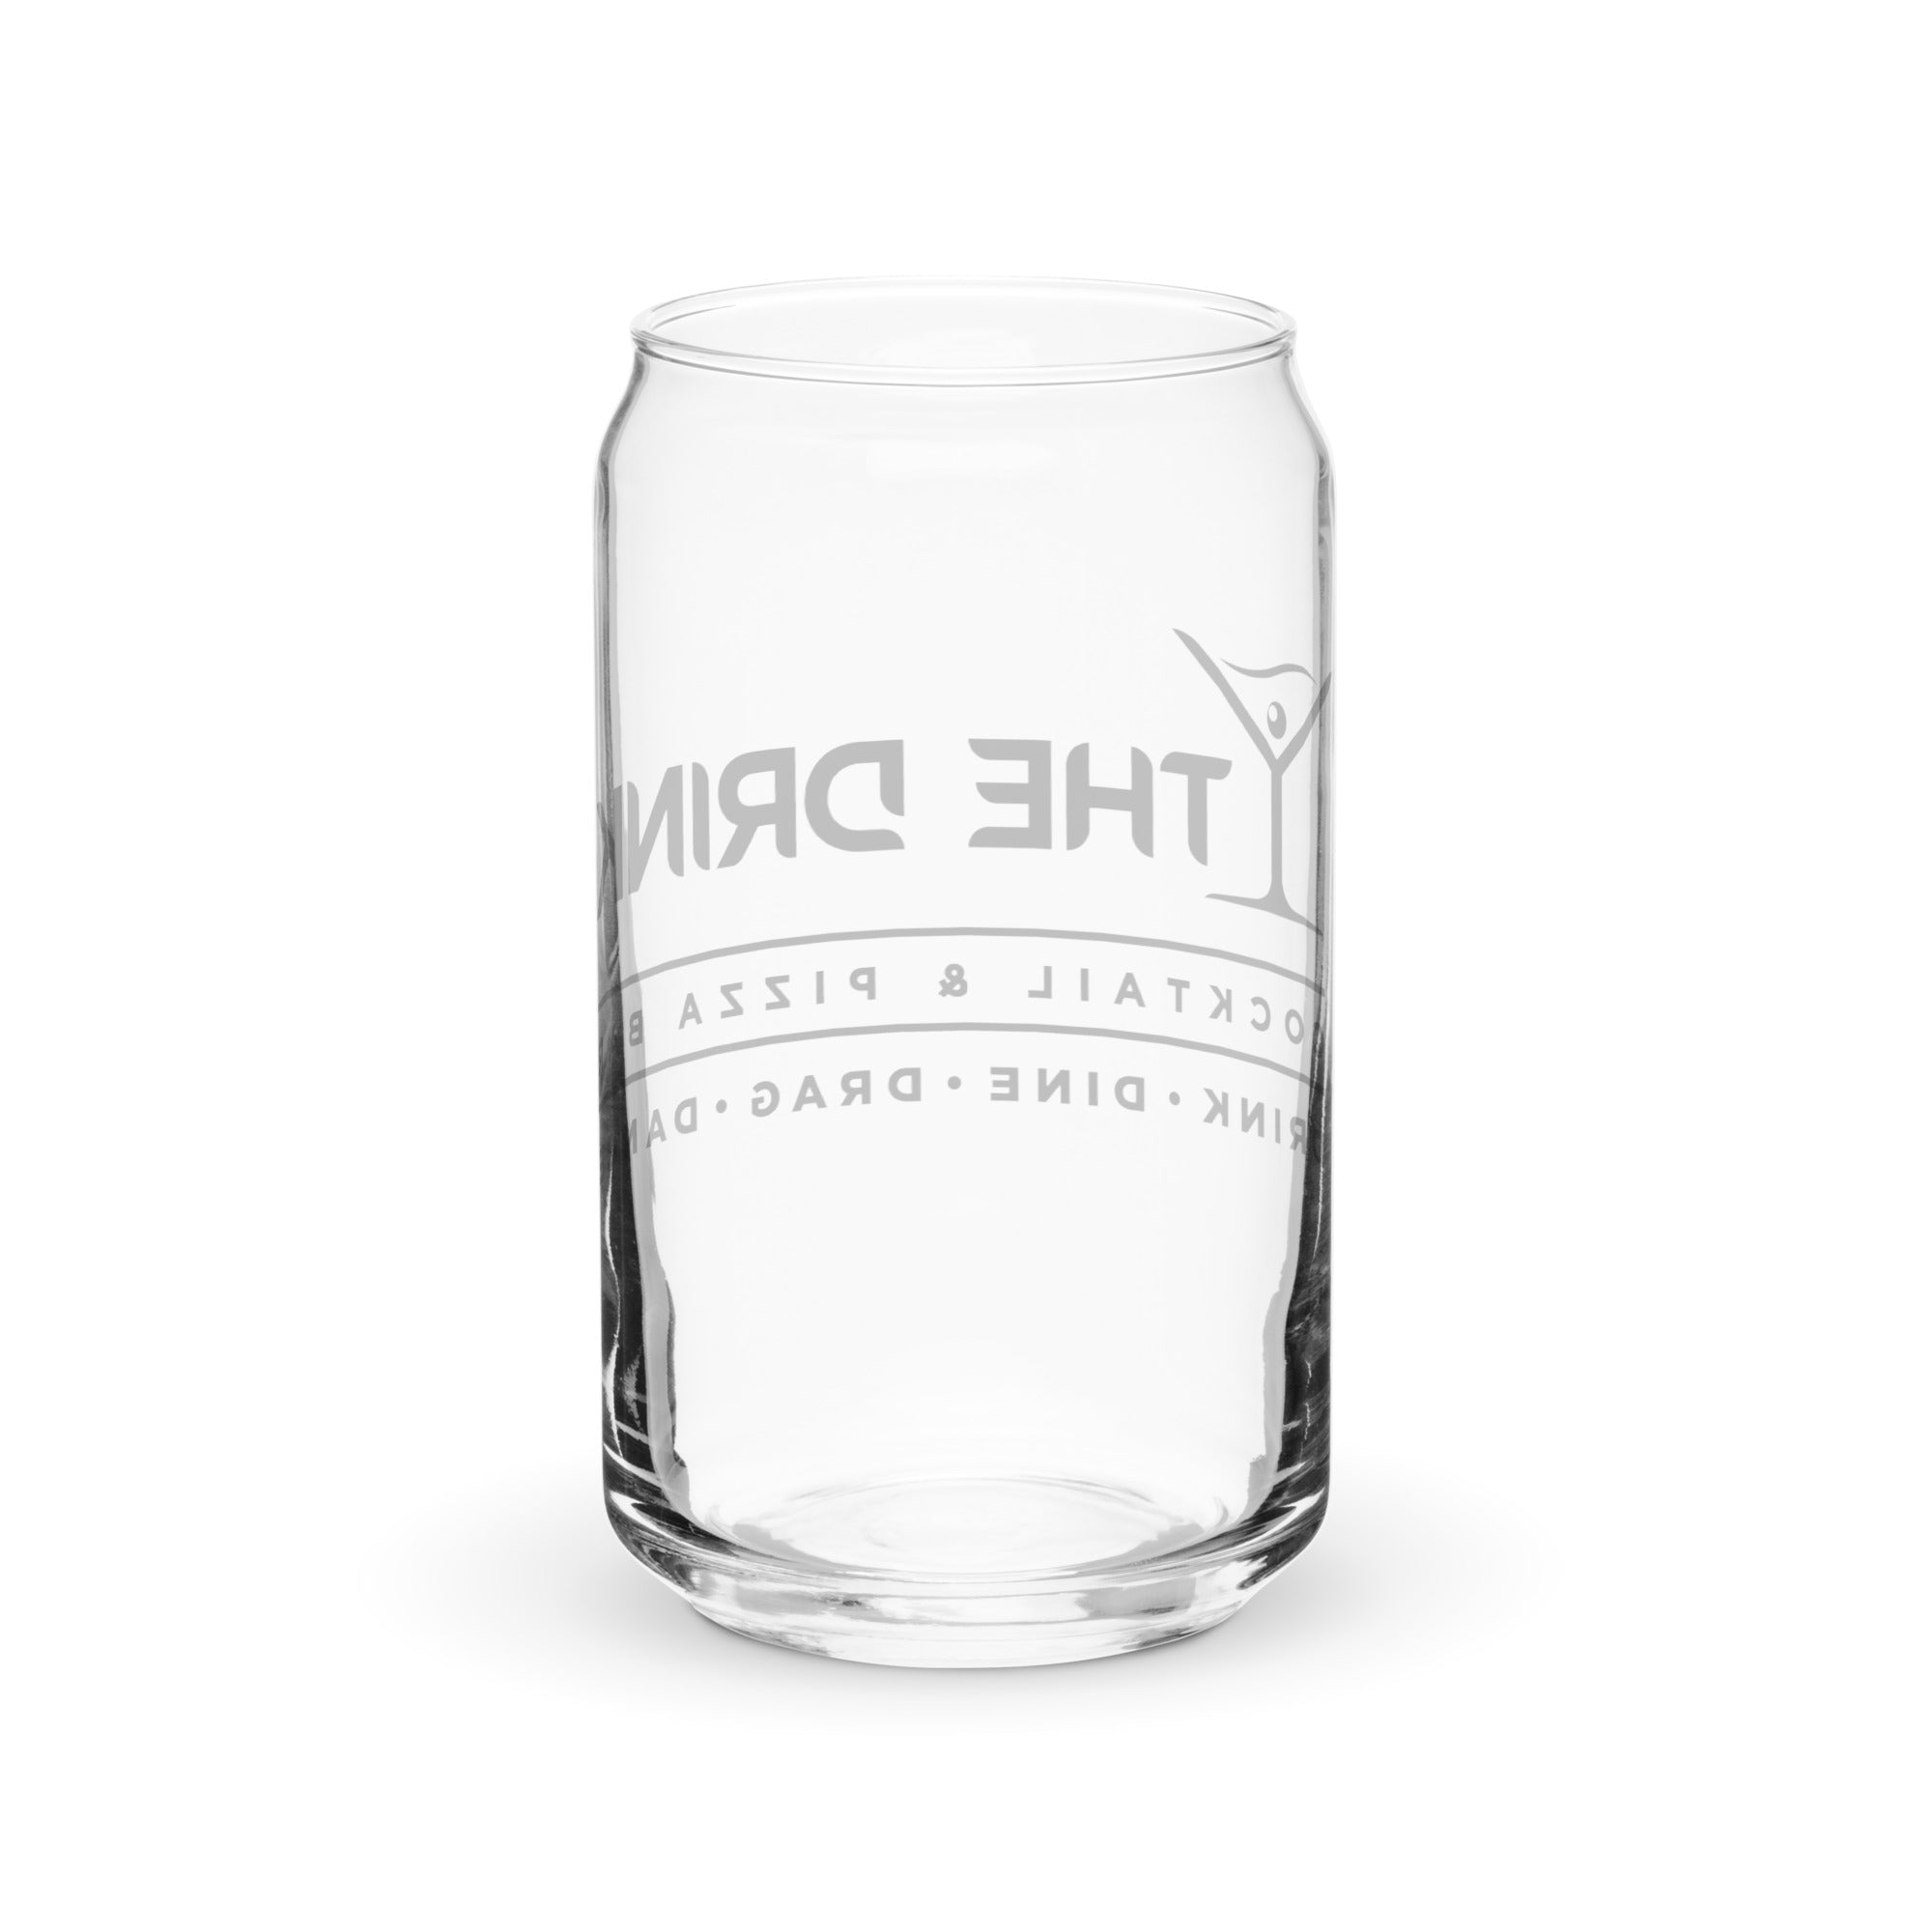 Offical Drink Glass